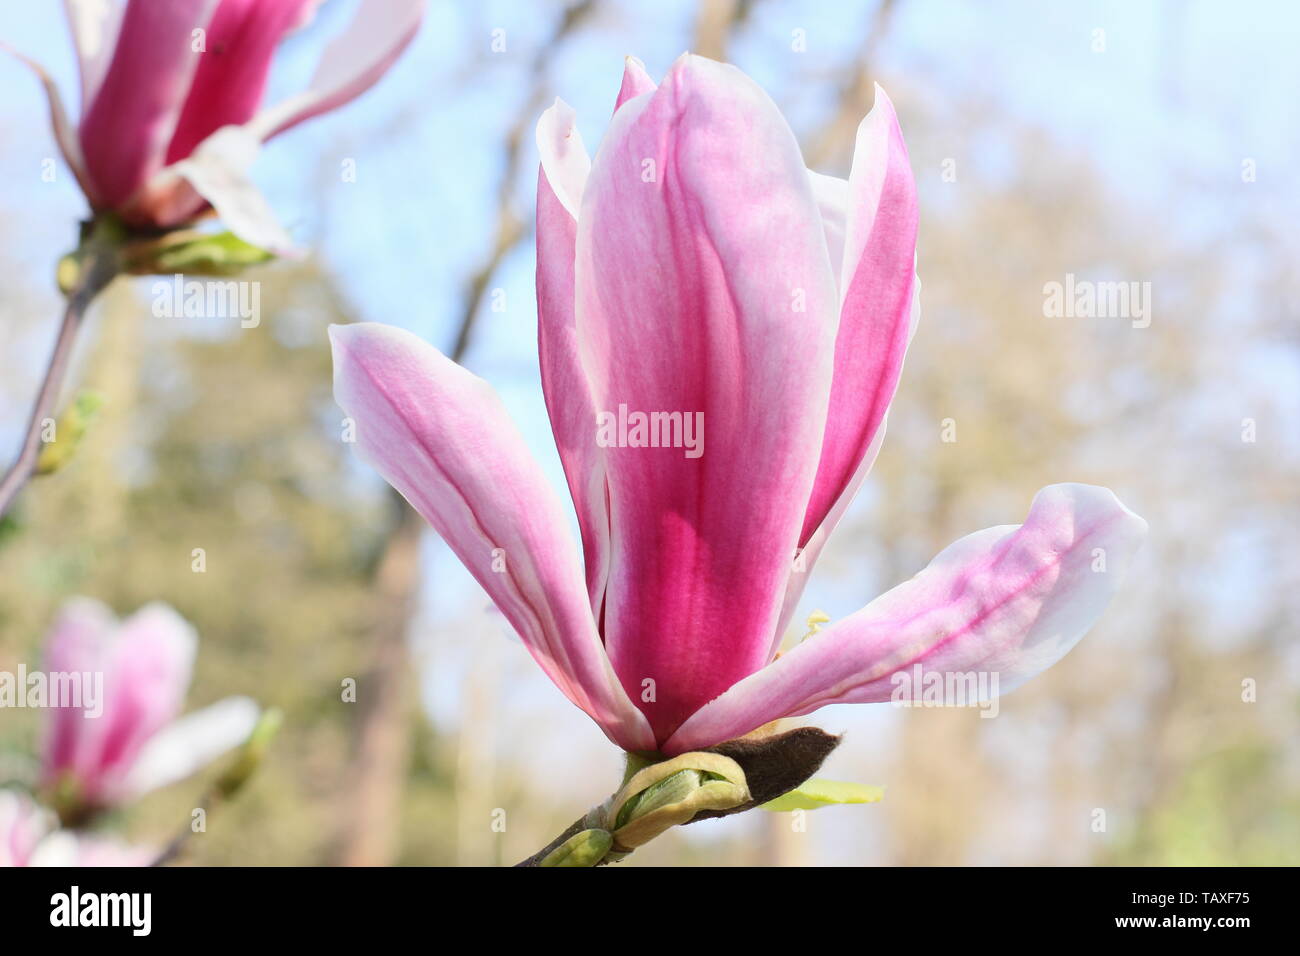 Magnolia x soulangeana ' Picture'. Rosy pink and white blossoms of hardy Magnolia 'Picture'. Also called Tulip magnolia. Stock Photo